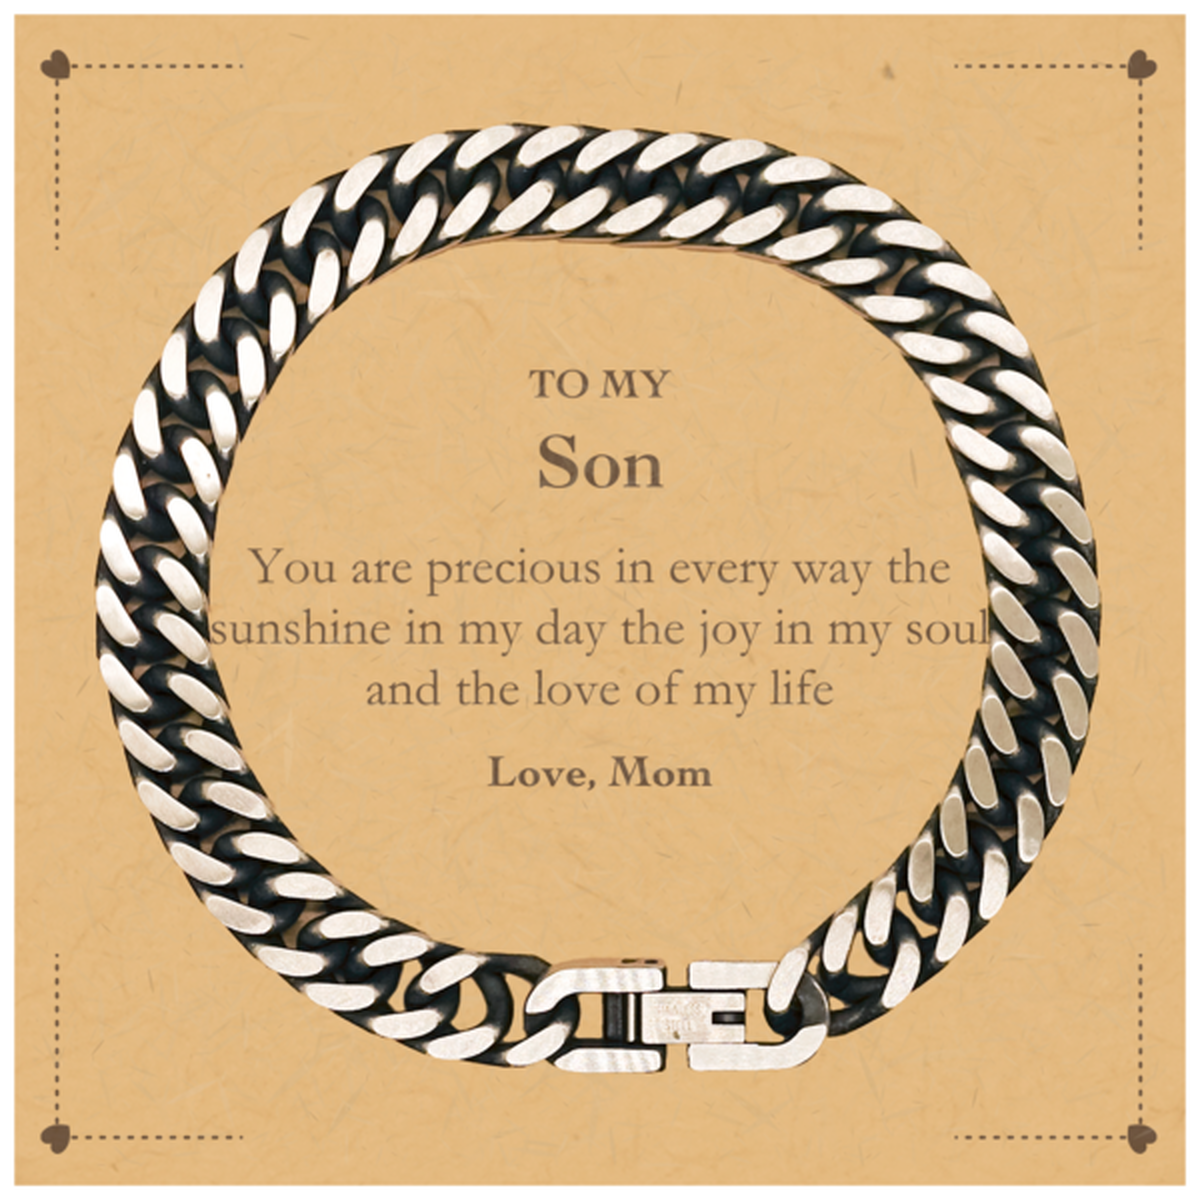 Graduation Gifts for Son Cuban Link Chain Bracelet Present from Mom, Christmas Son Birthday Gifts Son You are precious in every way the sunshine in my day. Love, Mom